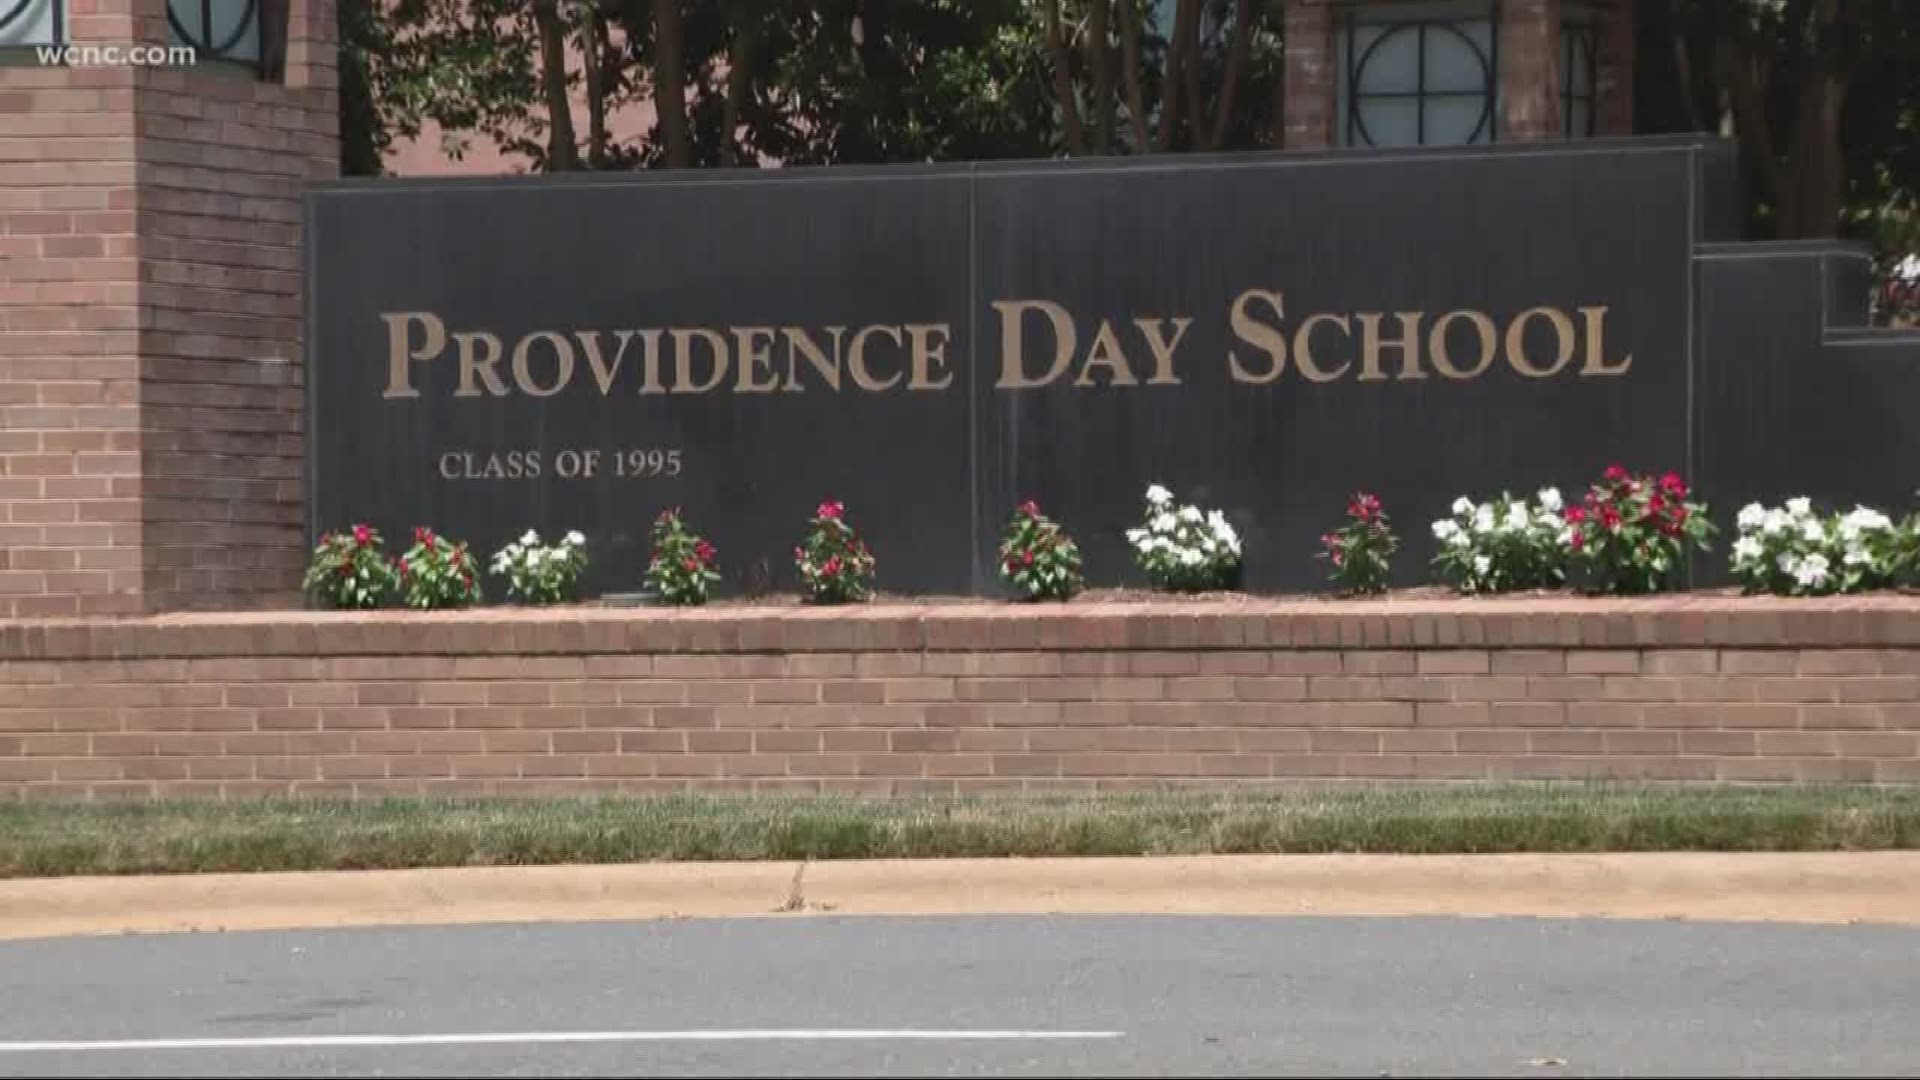 A Providence Day School student involved in a crash in Argentina has died, according to a statement released by the school Sunday afternoon.